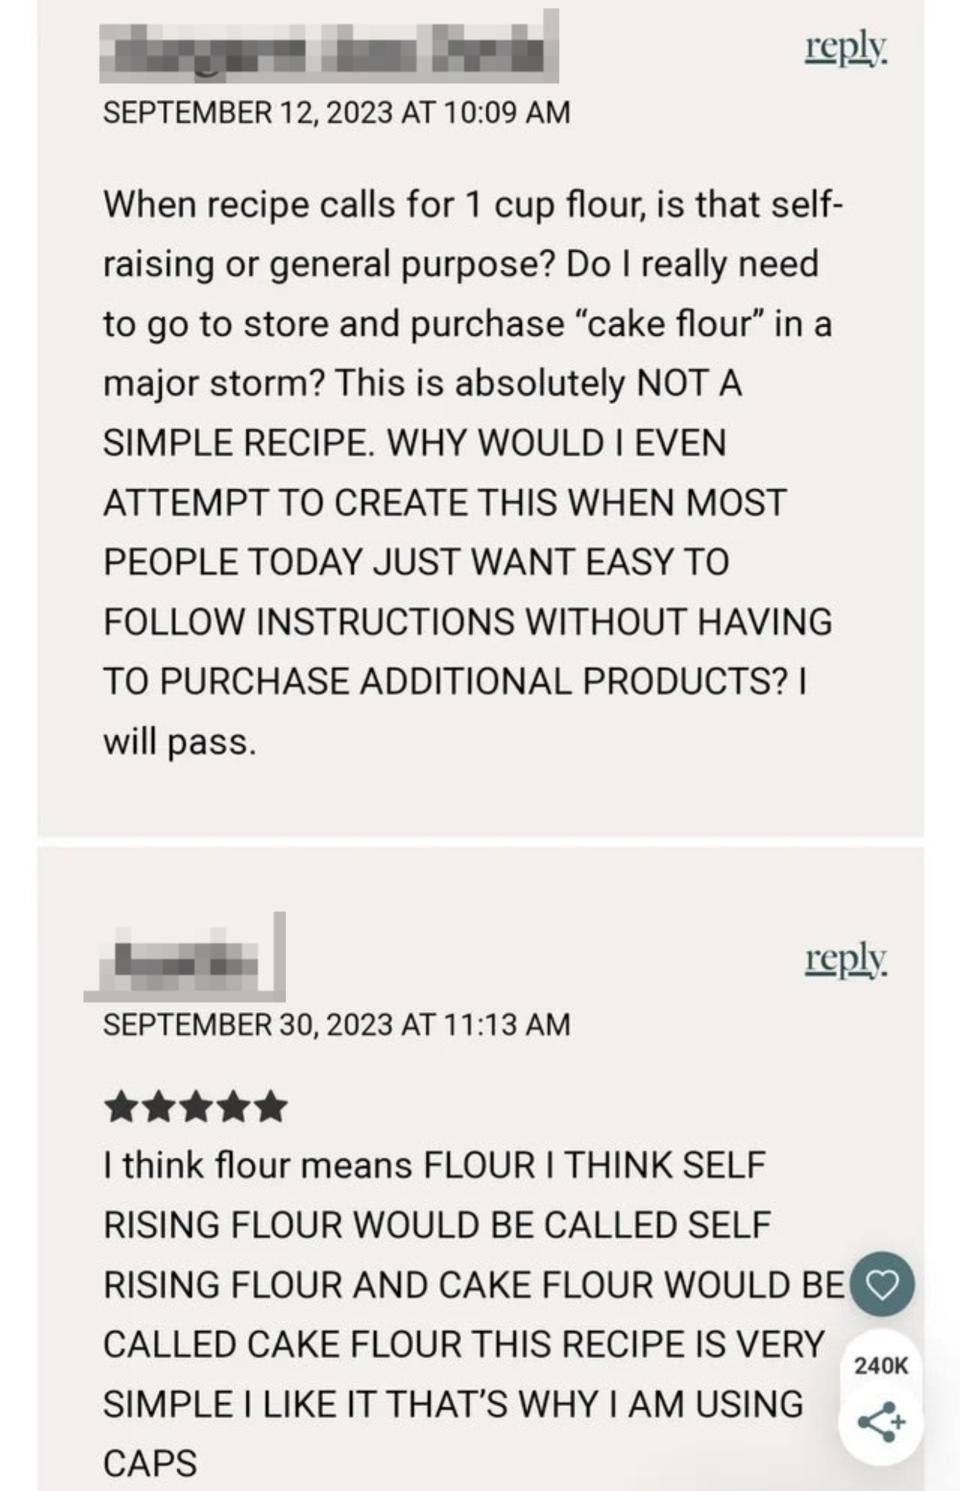 Someone angrily asking what it means when recipe calls for "1 cup flour," writing in all caps "Do I really need to go to the store and purchase cake flour in a major storm?"